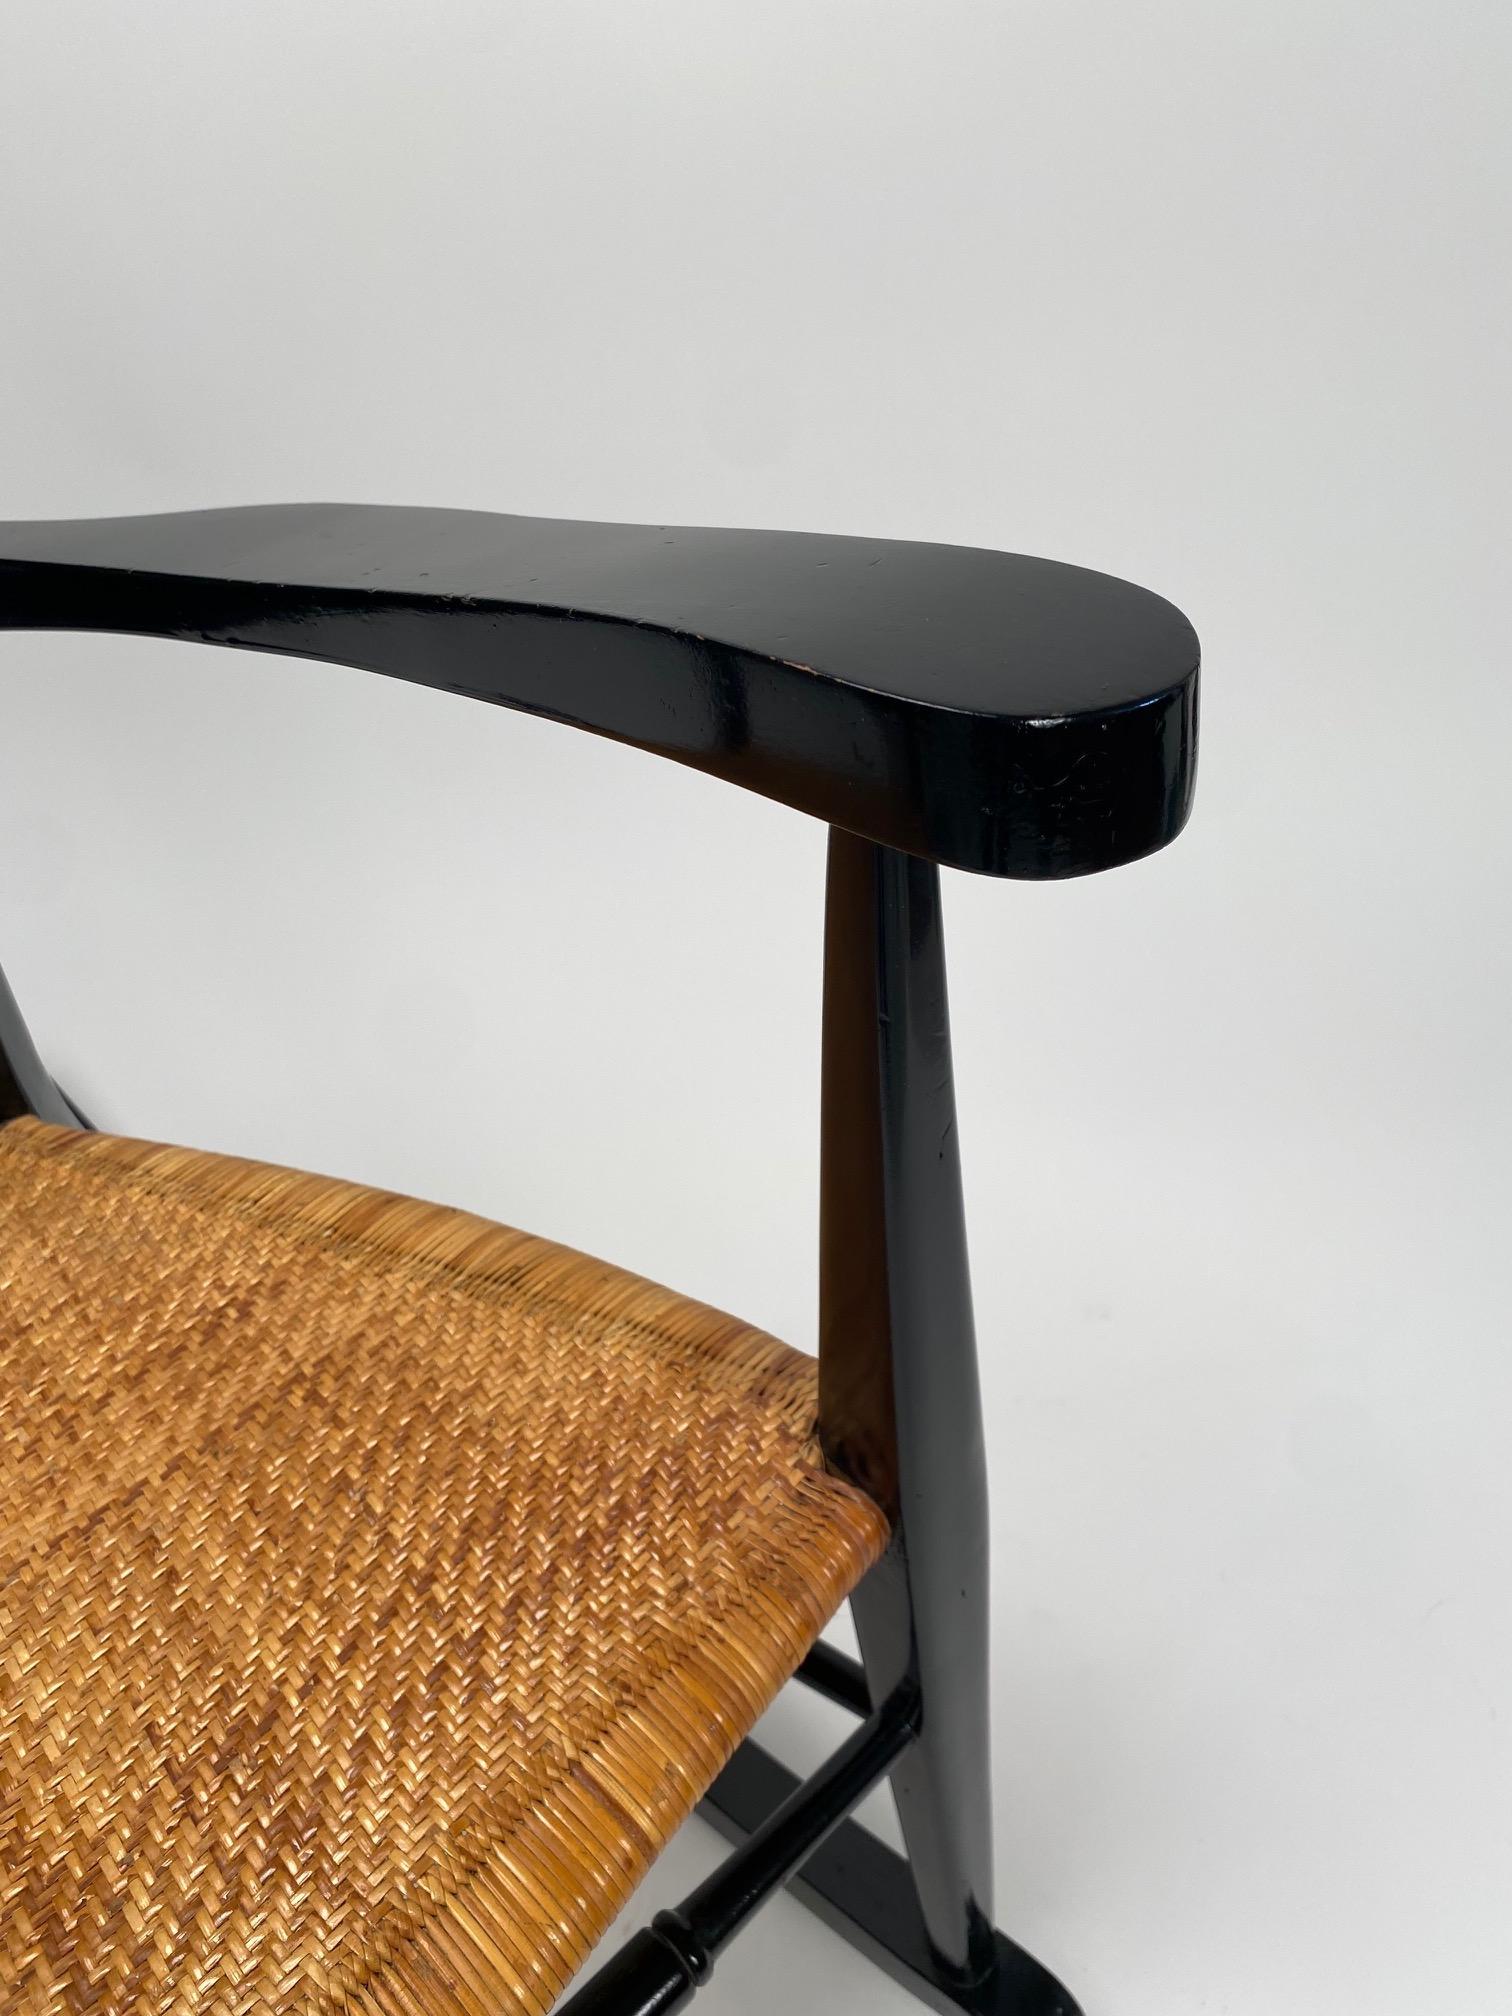 Italian Mid-Century Rocking Chair, Black lacquered wood, Paolo Buffa Style 1950s For Sale 2